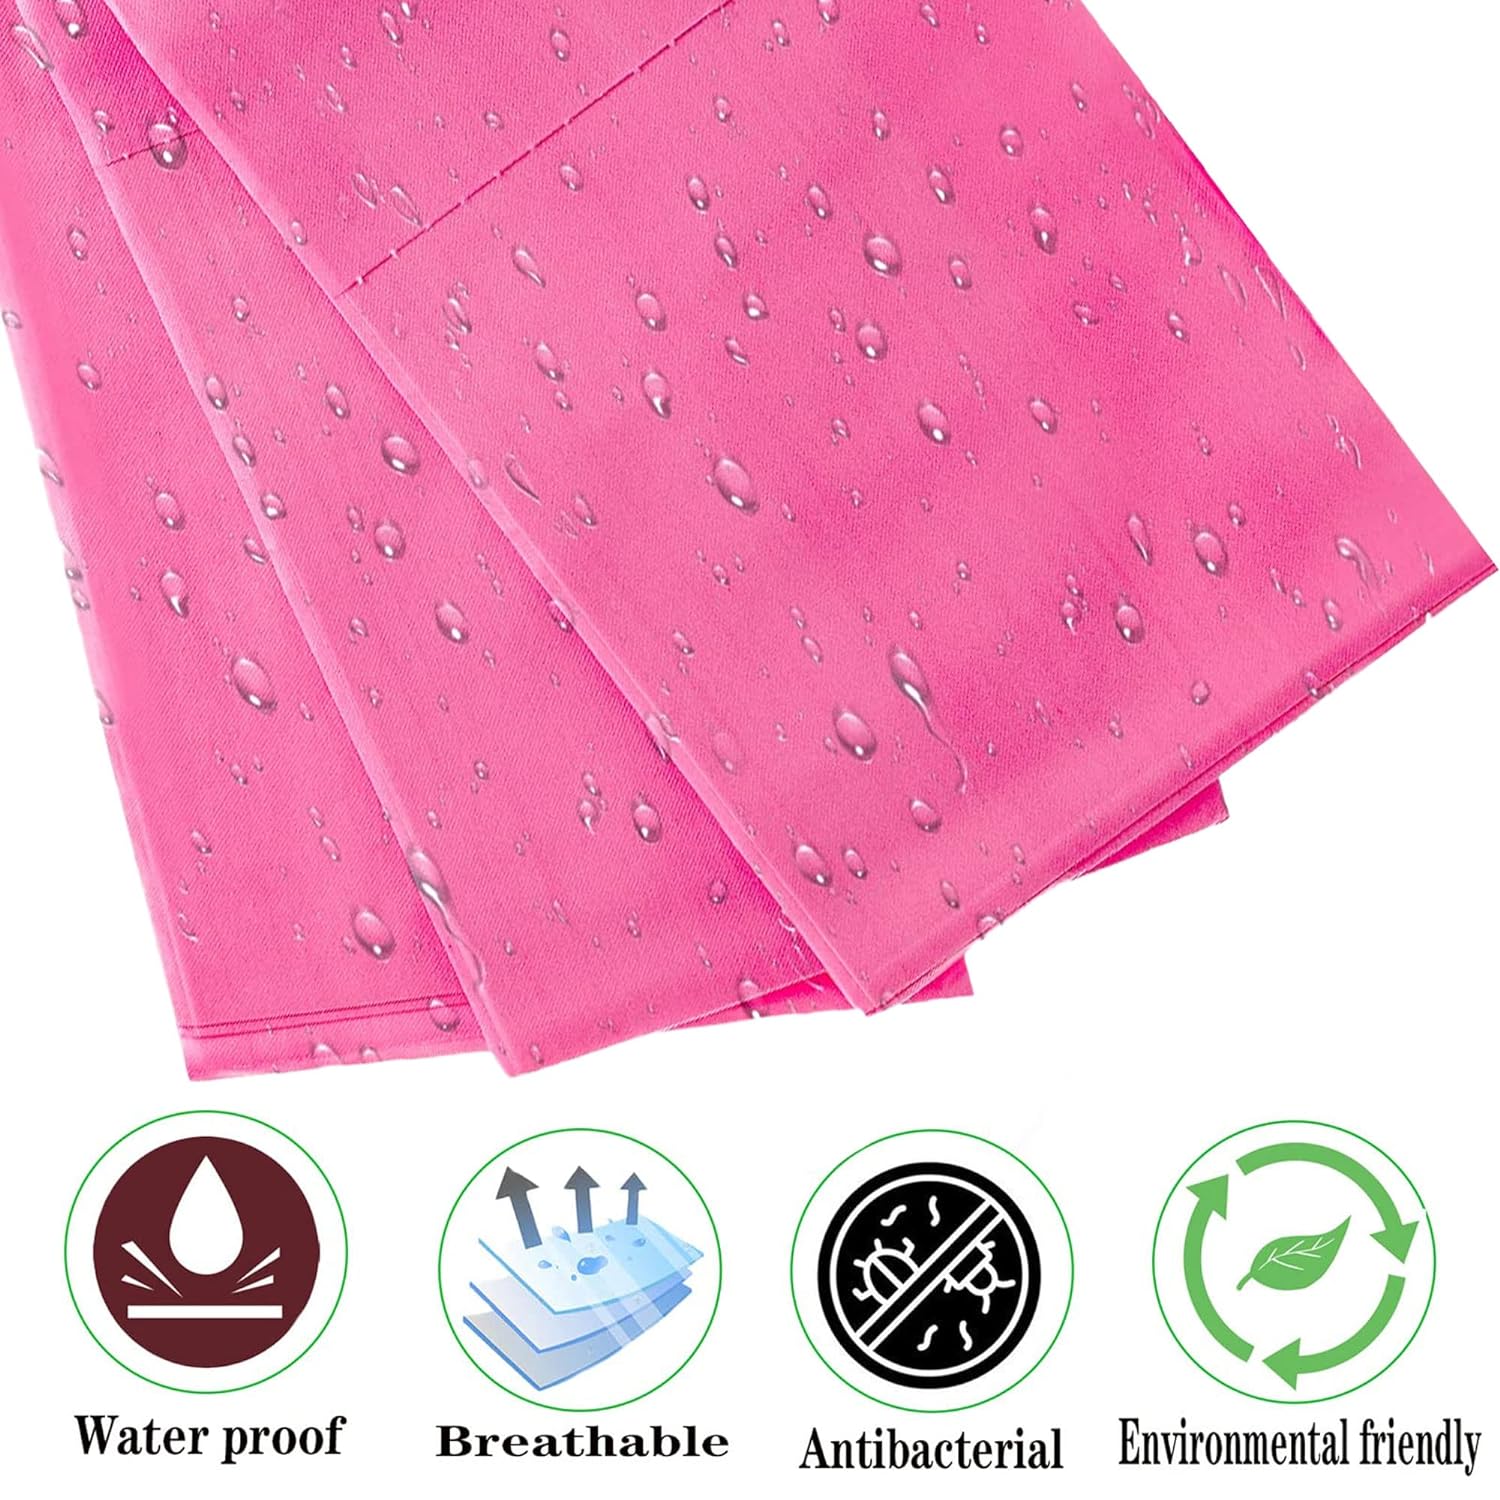 NATYTS 50 PCS 31 x 71 Inches Disposable Bed Sheets Waterproof Massage Table Sheet Non-woven Fabric Lash Cover for Spa/Beauty/travel/Salon(Pink)